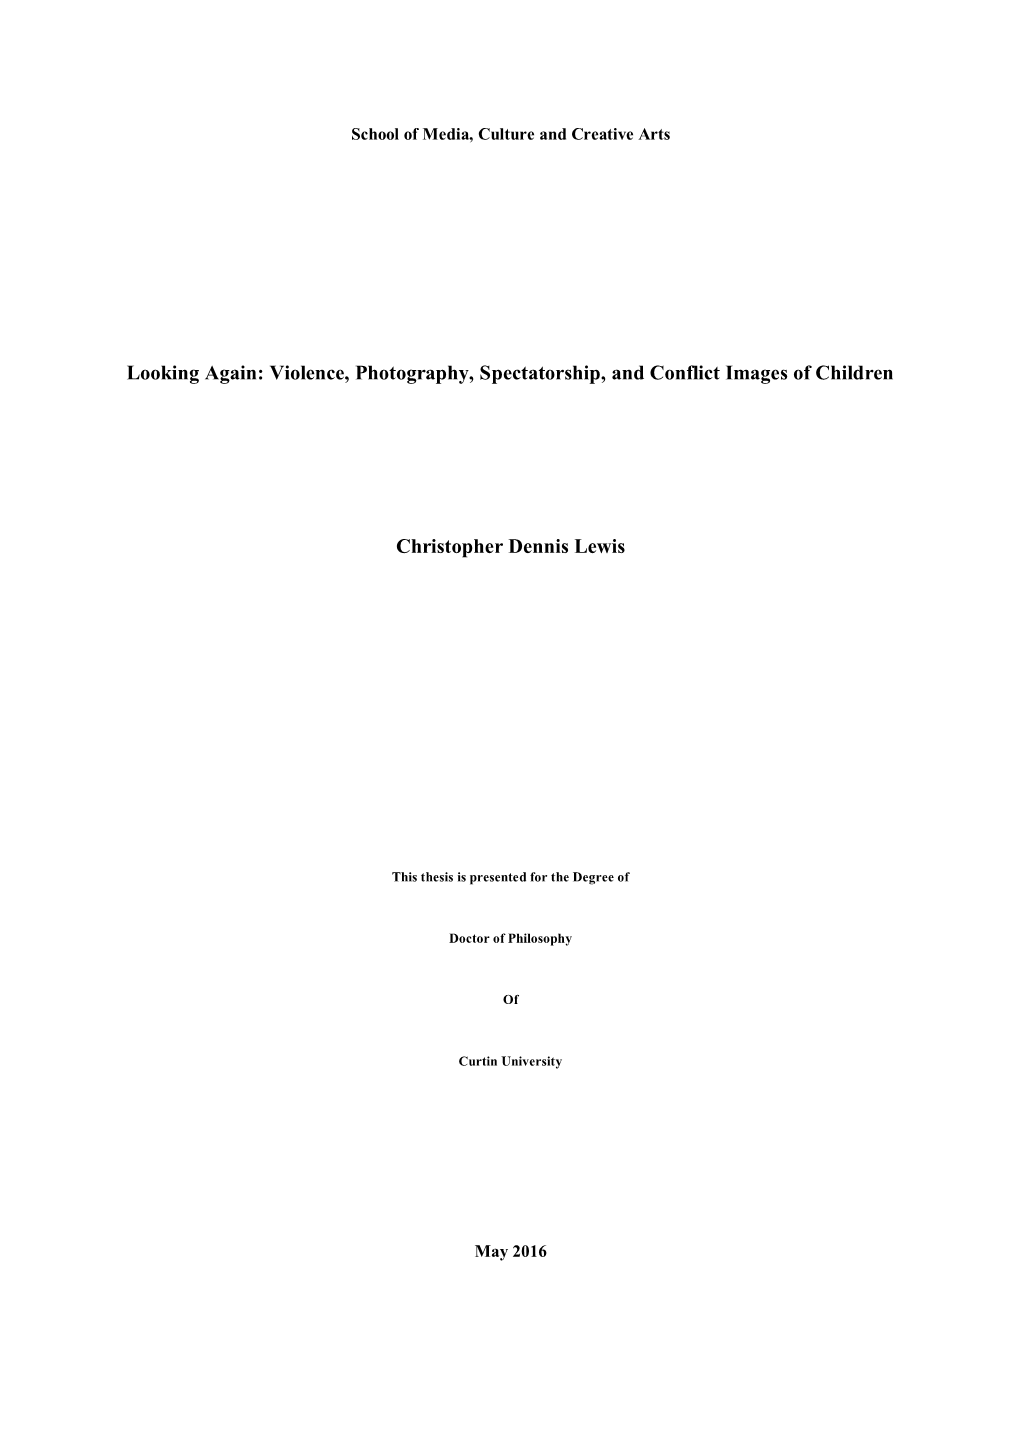 Looking Again: Violence, Photography, Spectatorship, and Conflict Images of Children